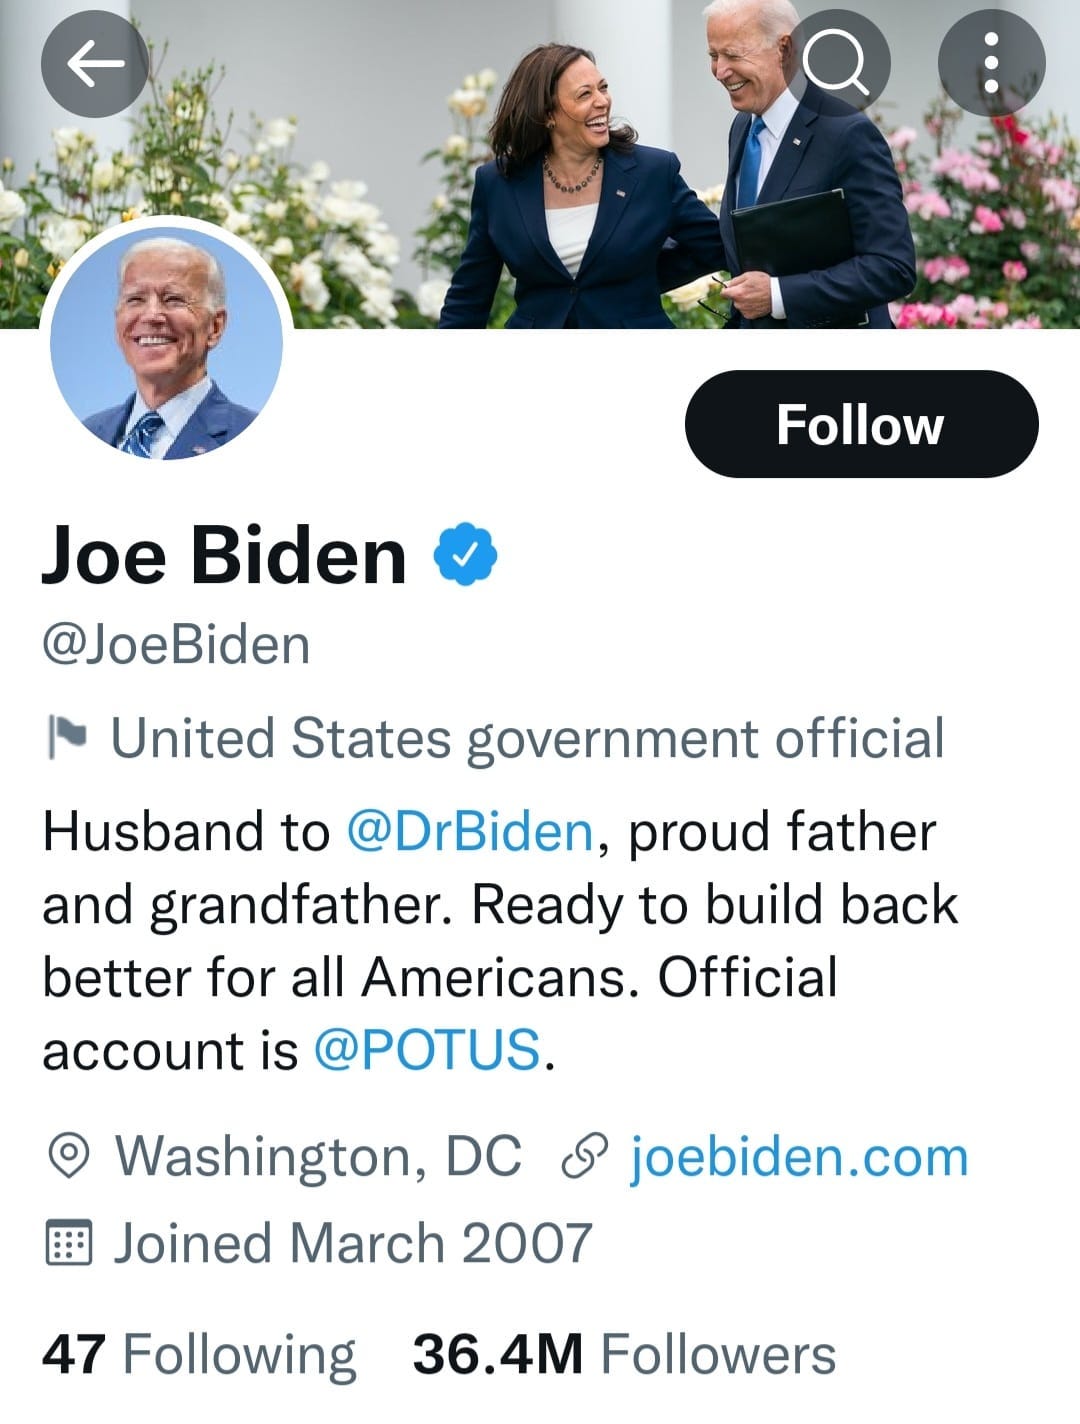 May be a Twitter screenshot of 3 people and text that says 'Follow Joe Biden @JoeBiden United States government official Husband to @DrBiden, proud father and grandfather. Ready to build back better for all Americans. Official account is @POTUS. Washington, DC ශ joebiden.com Joined March 2007 47 Following 36.4M Followers'